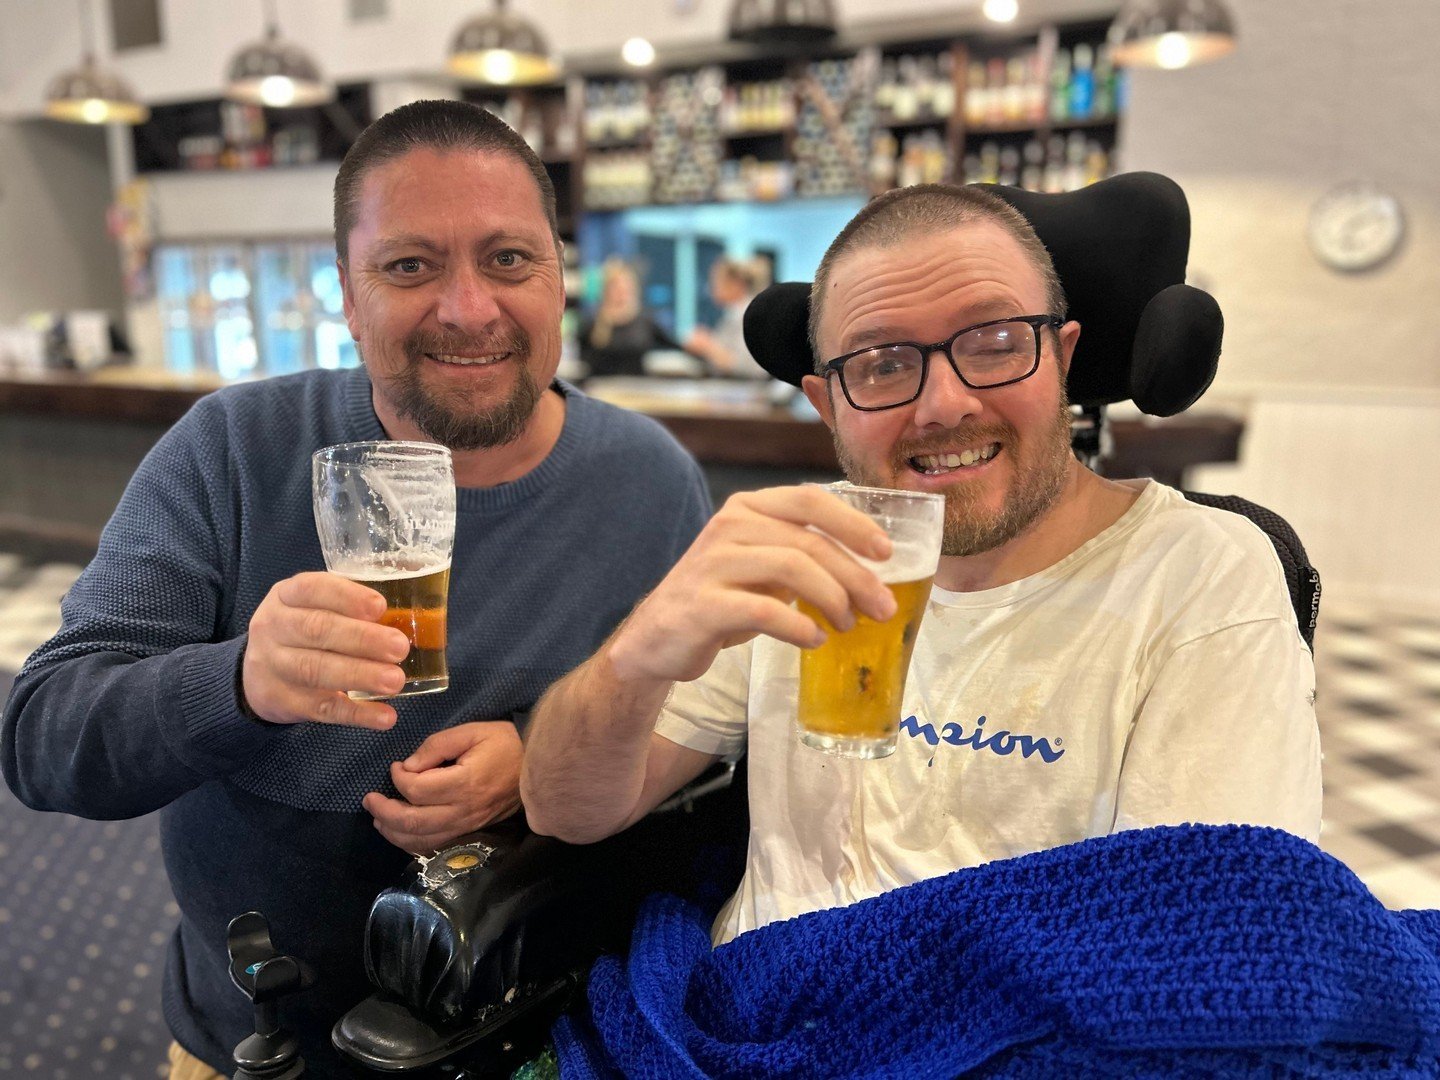 We hope you all enjoyed your weekend! 
Fred and Jock had a fantastic time catching up down at the pub! We love to see our participants out enjoying the little things in life, as well as having the opportunity to practice money management and social s